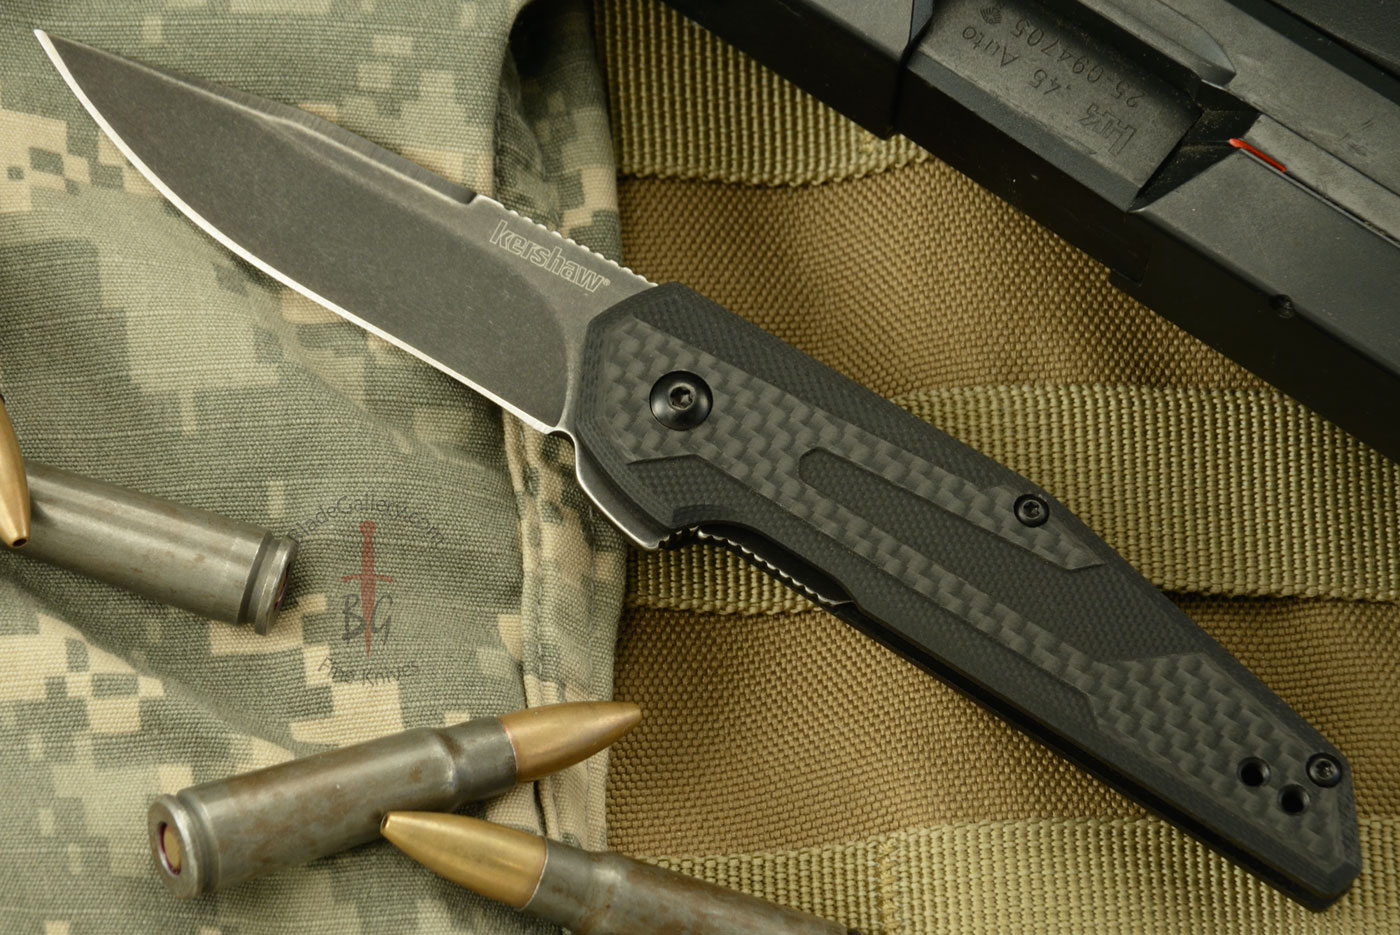 Anso Fraxion Flipper (1160) - Ultra-light EDC with KVT